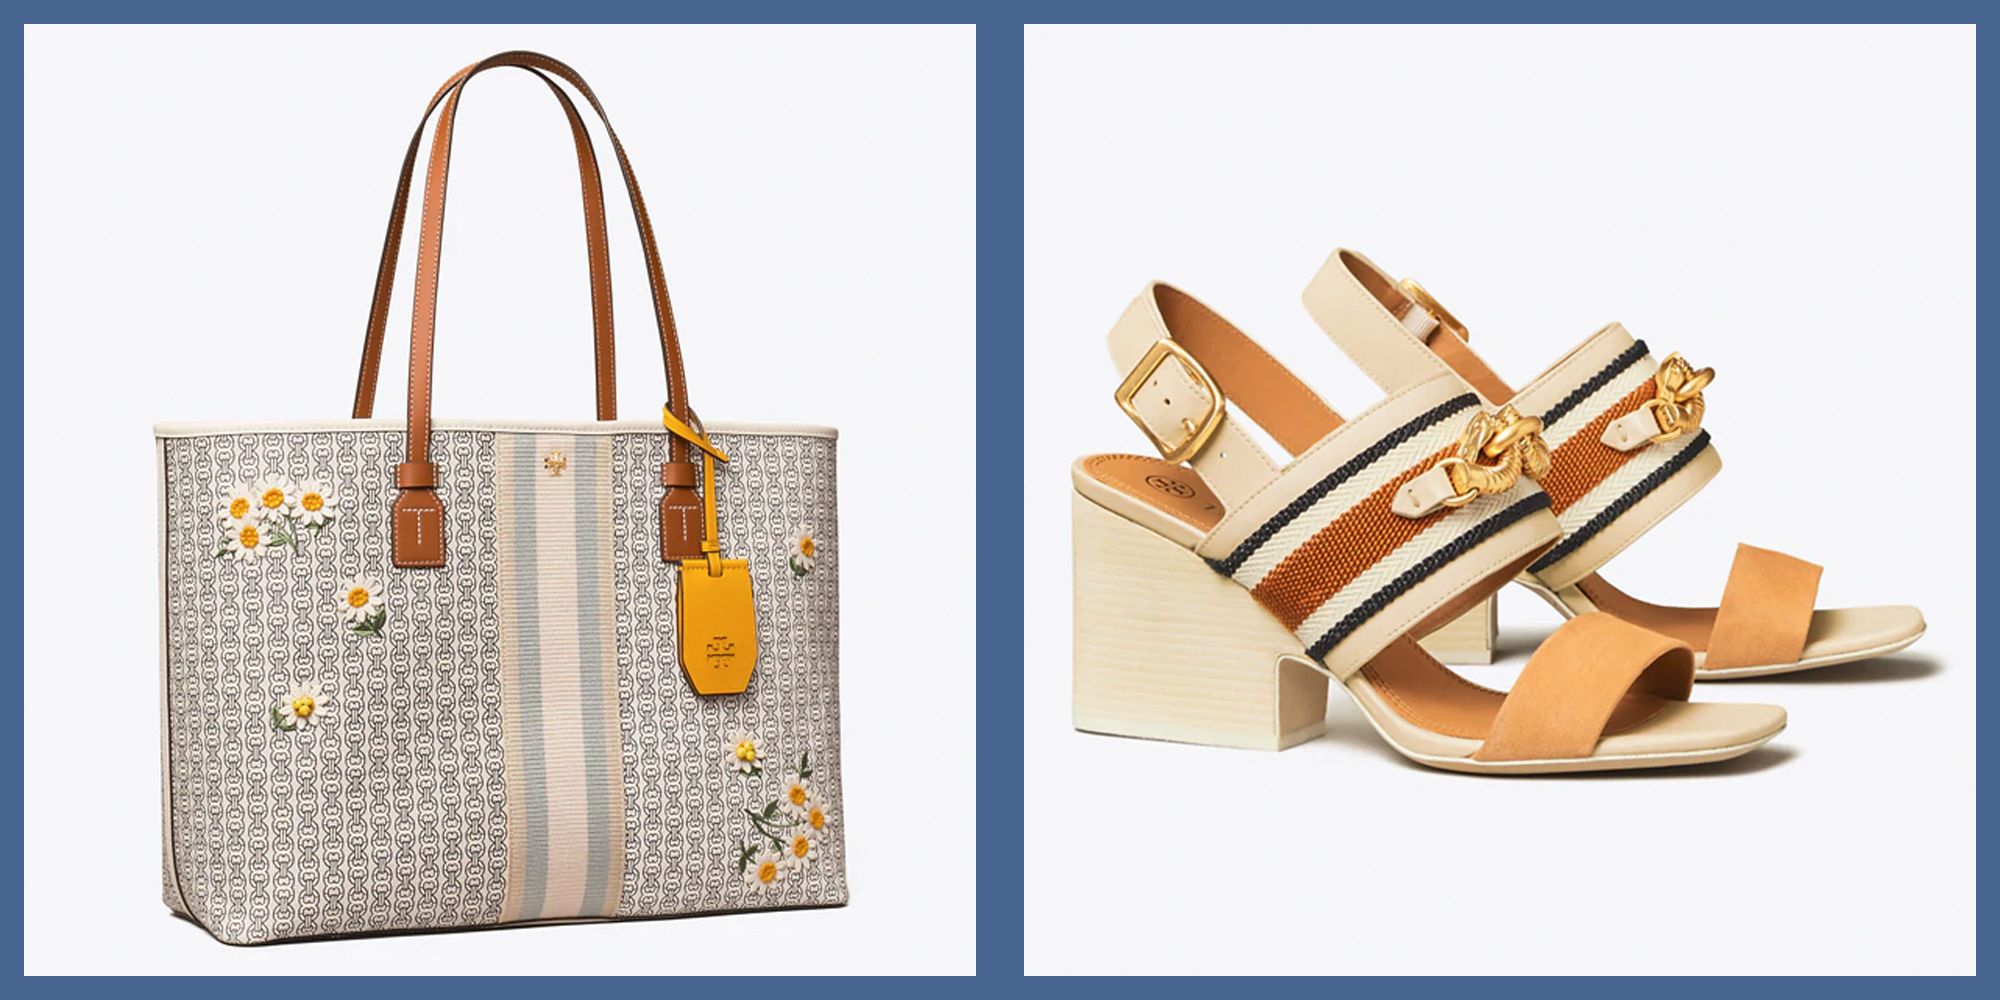 Tory Burch Bags: 15 Picks From the Semi-Annual Sale Up to 62% Off